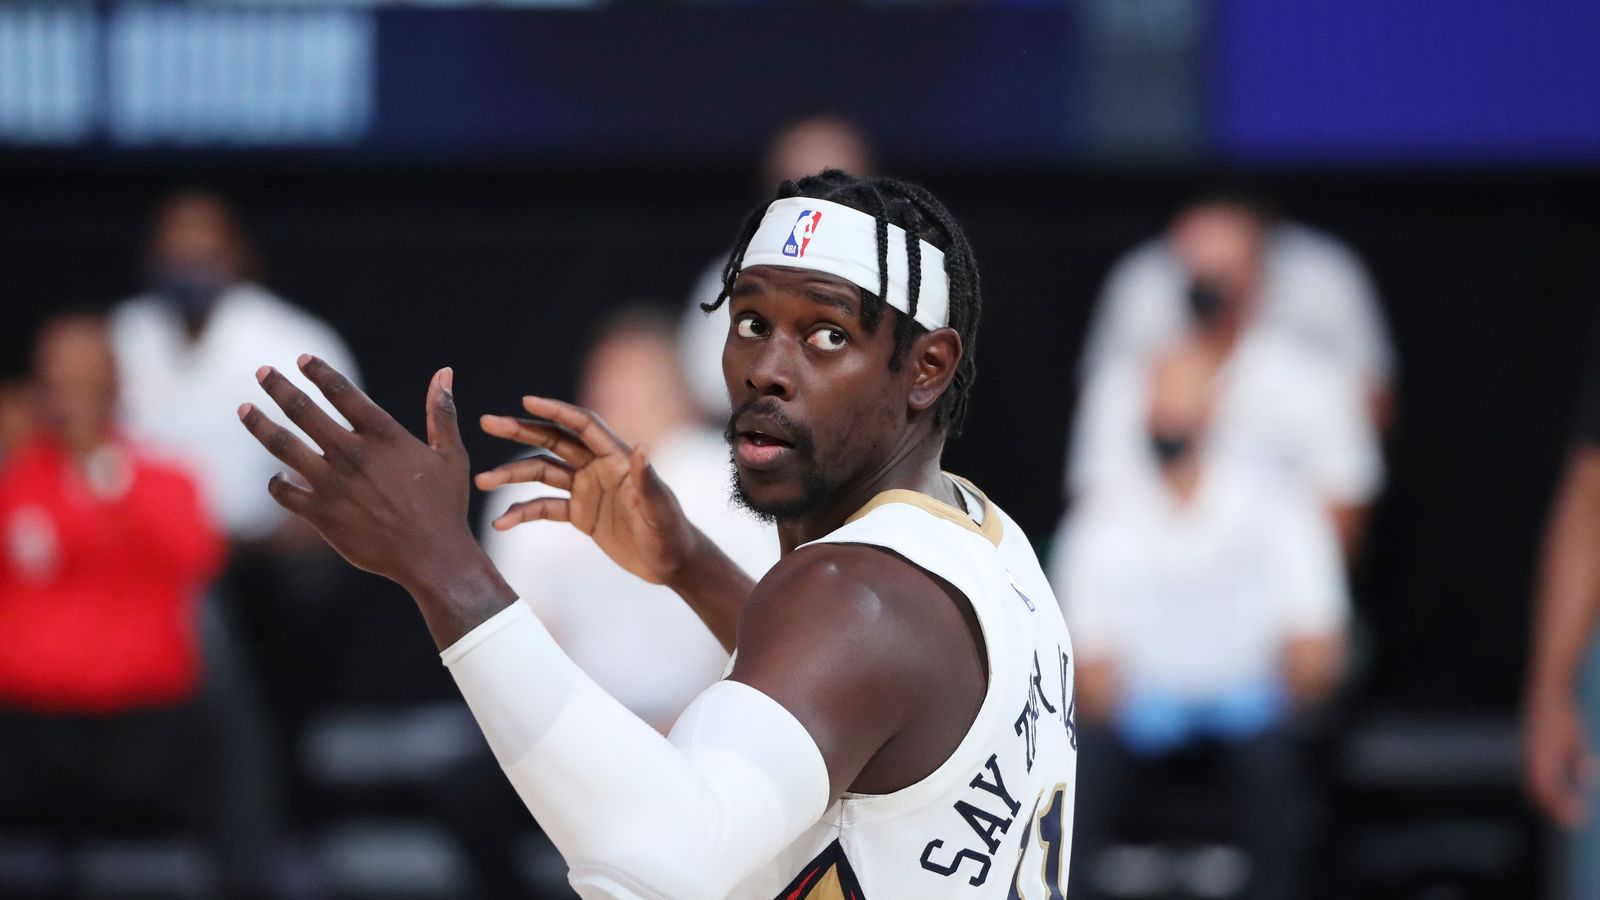 NBA Rumors: Four Teams That Could Trade for Jrue Holiday - Last